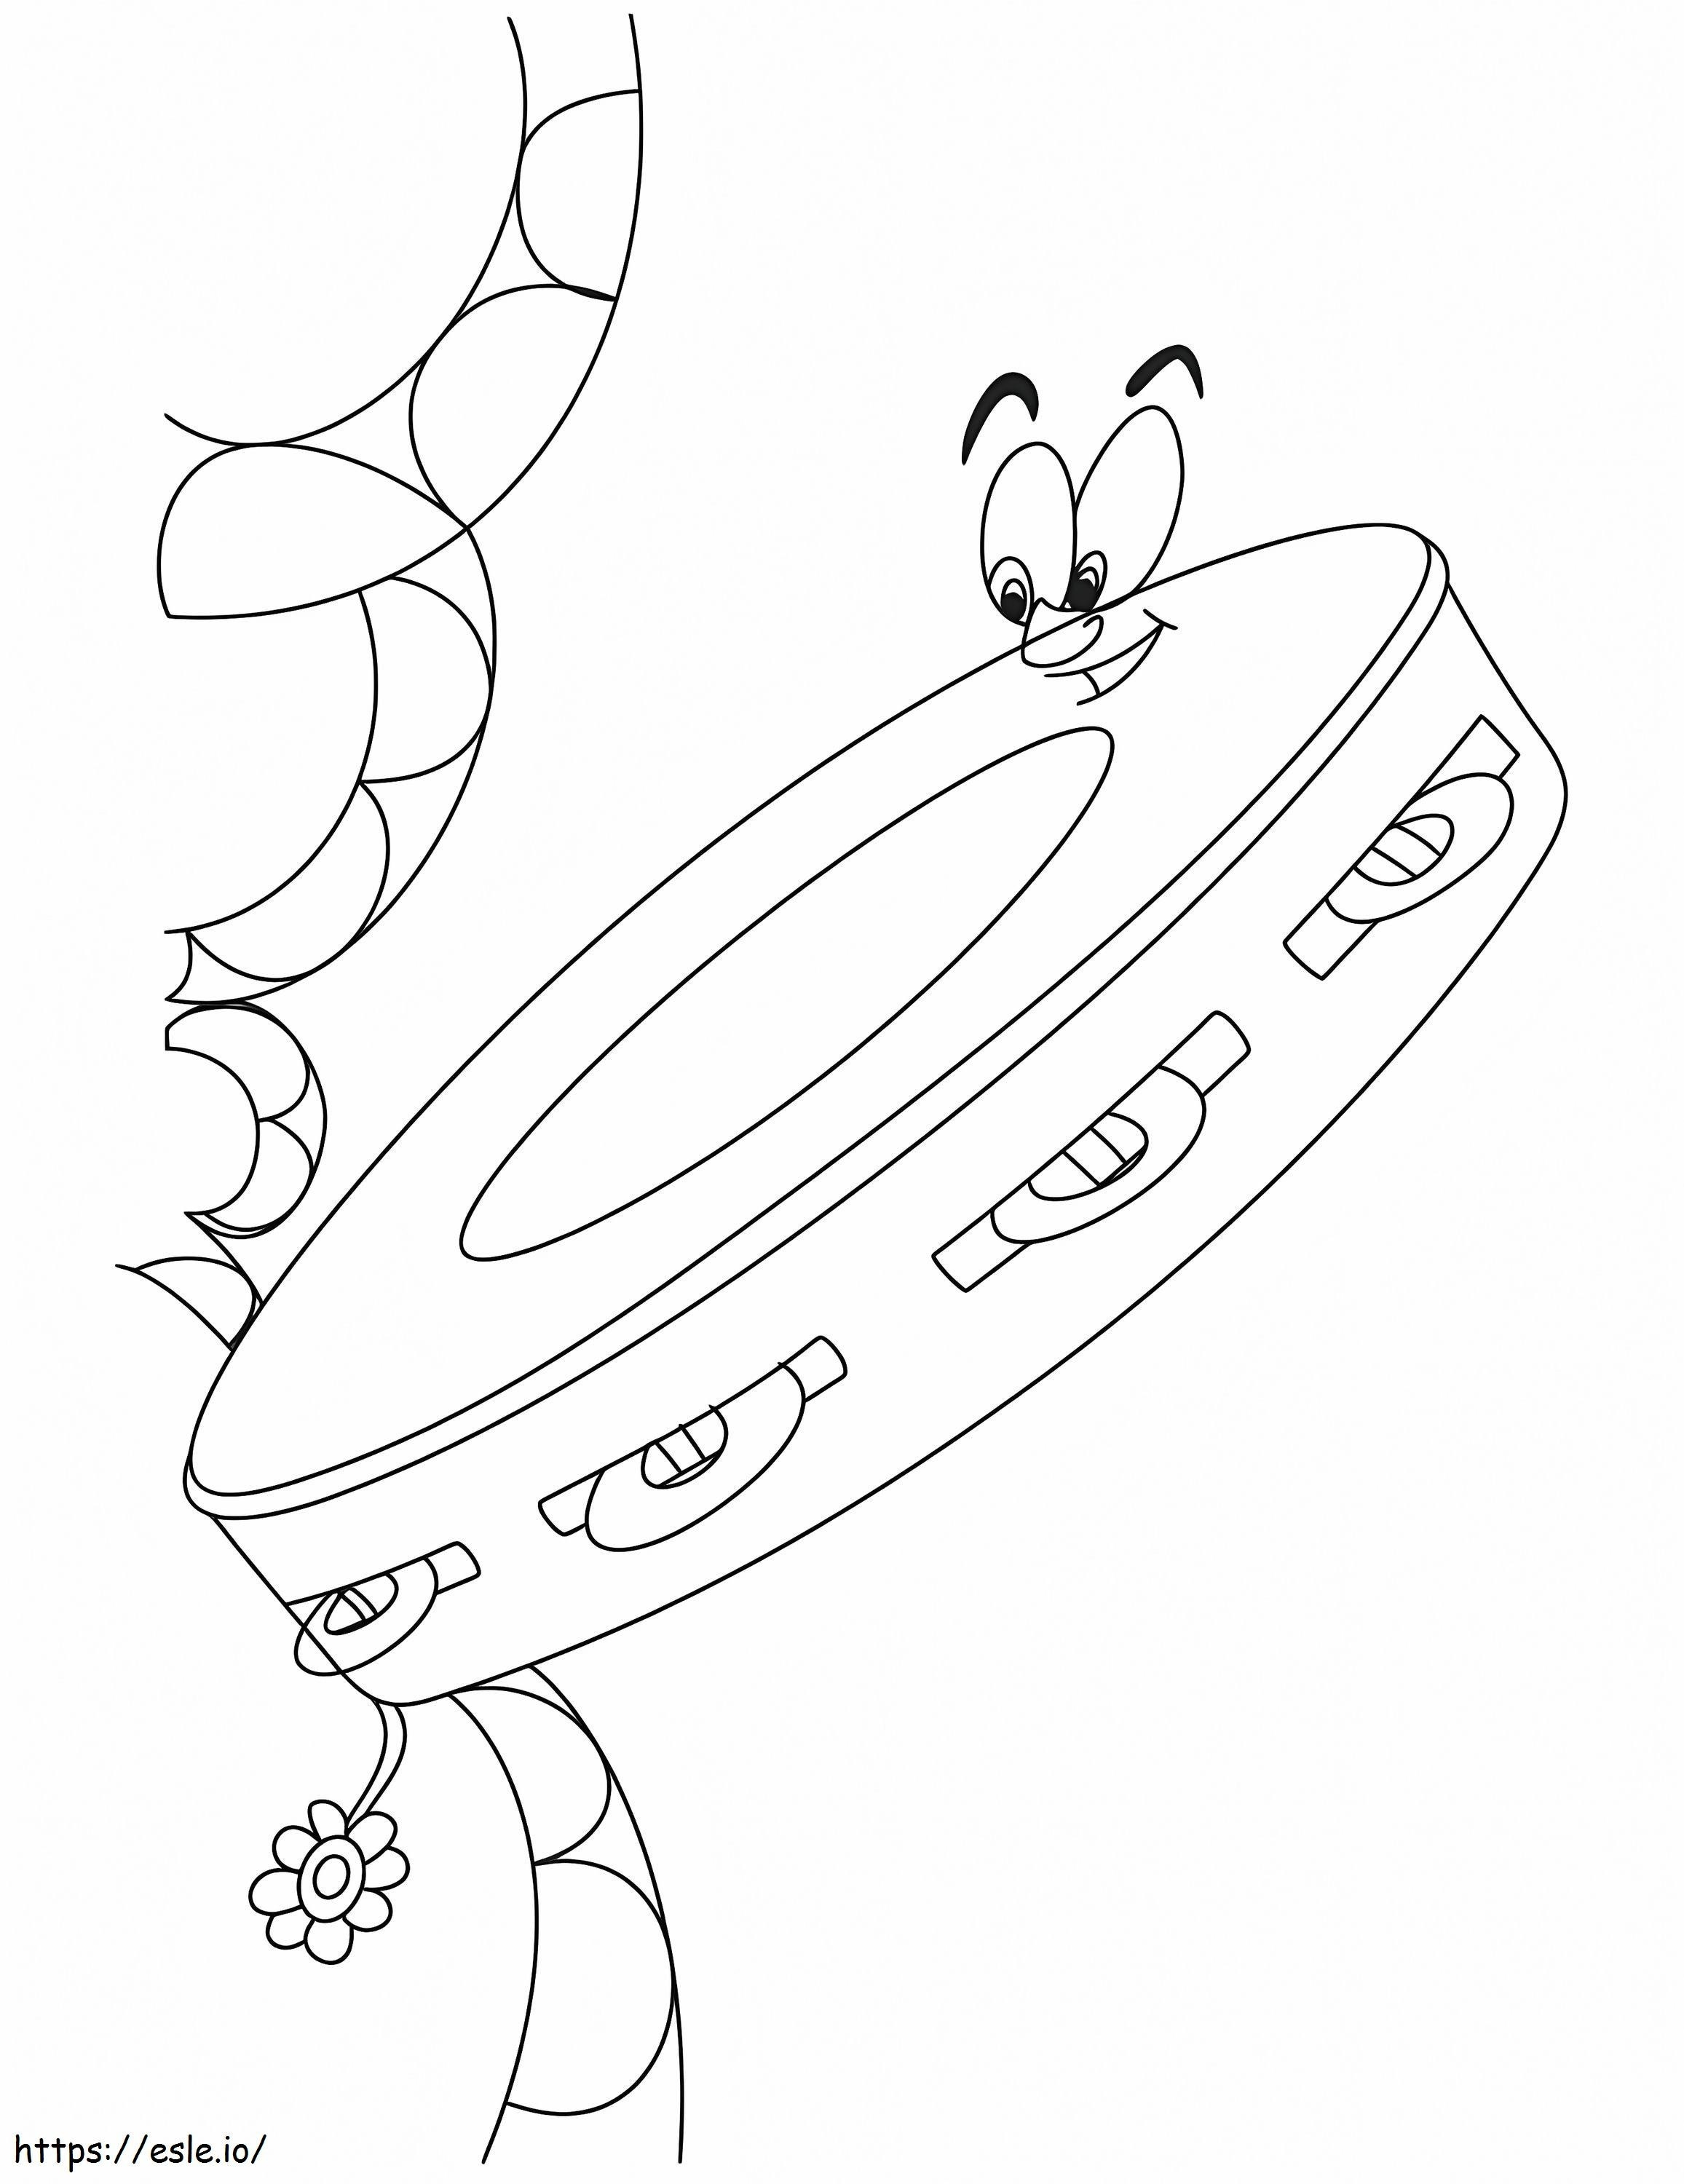 Funny Tambourine coloring page